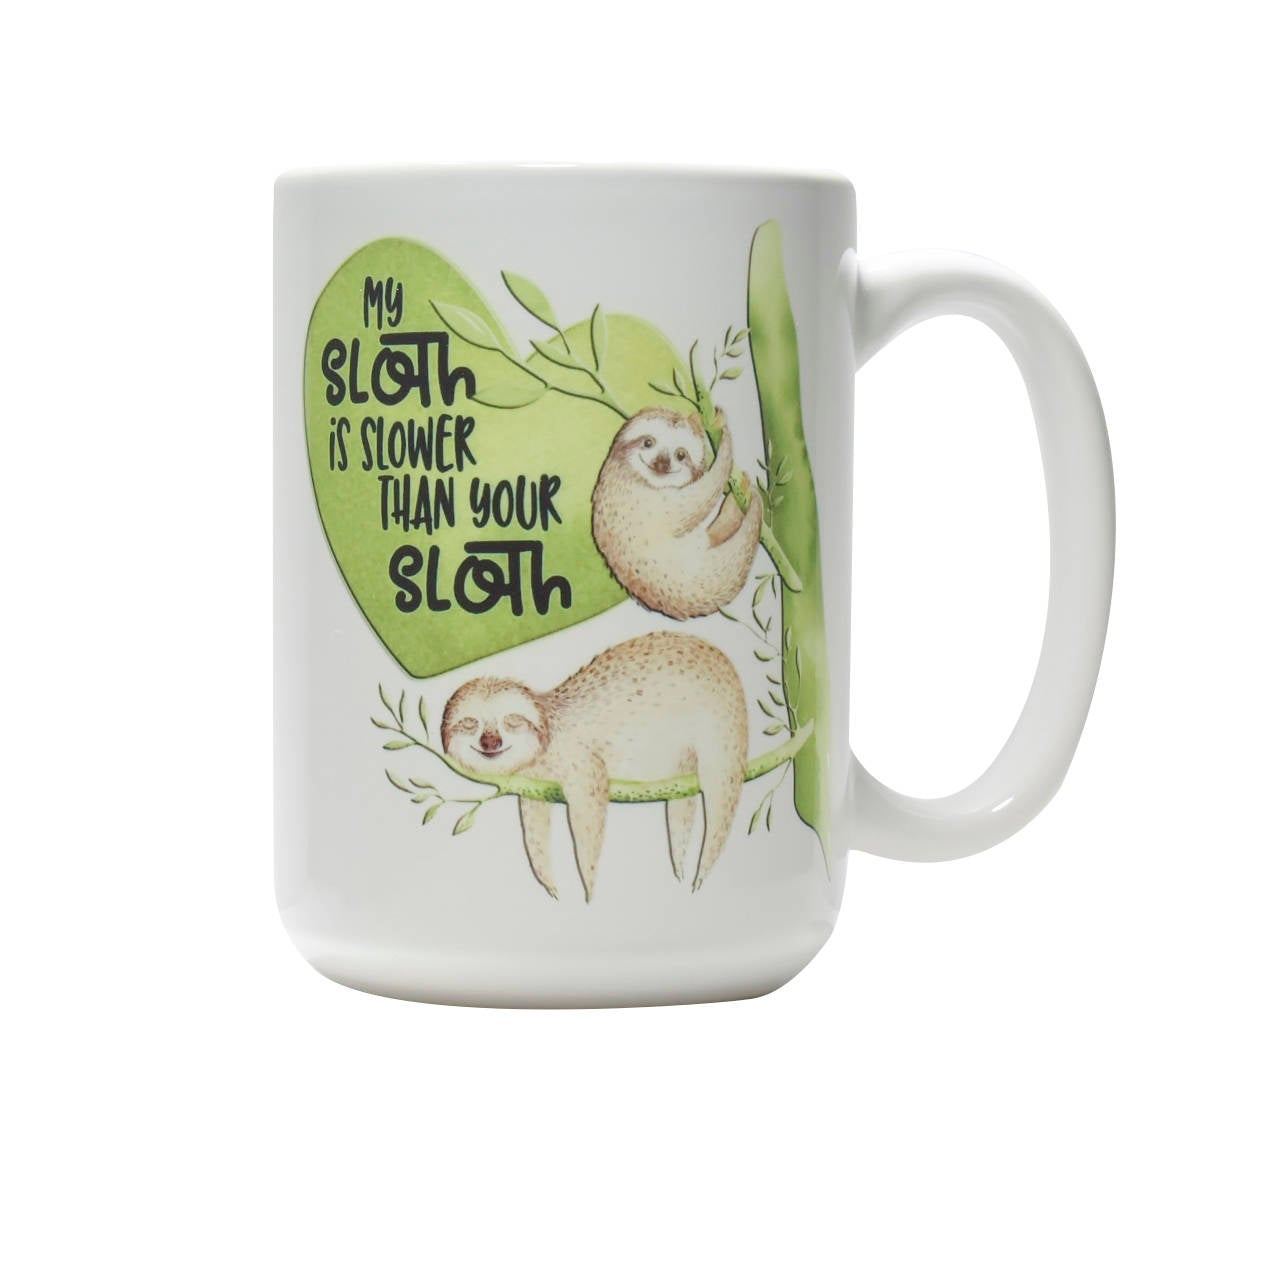 My Sloth is slower than your Sloth coffee mug | Friend Gift | Office Mug | Sloth Gift | Animal Lover | Gift for Her